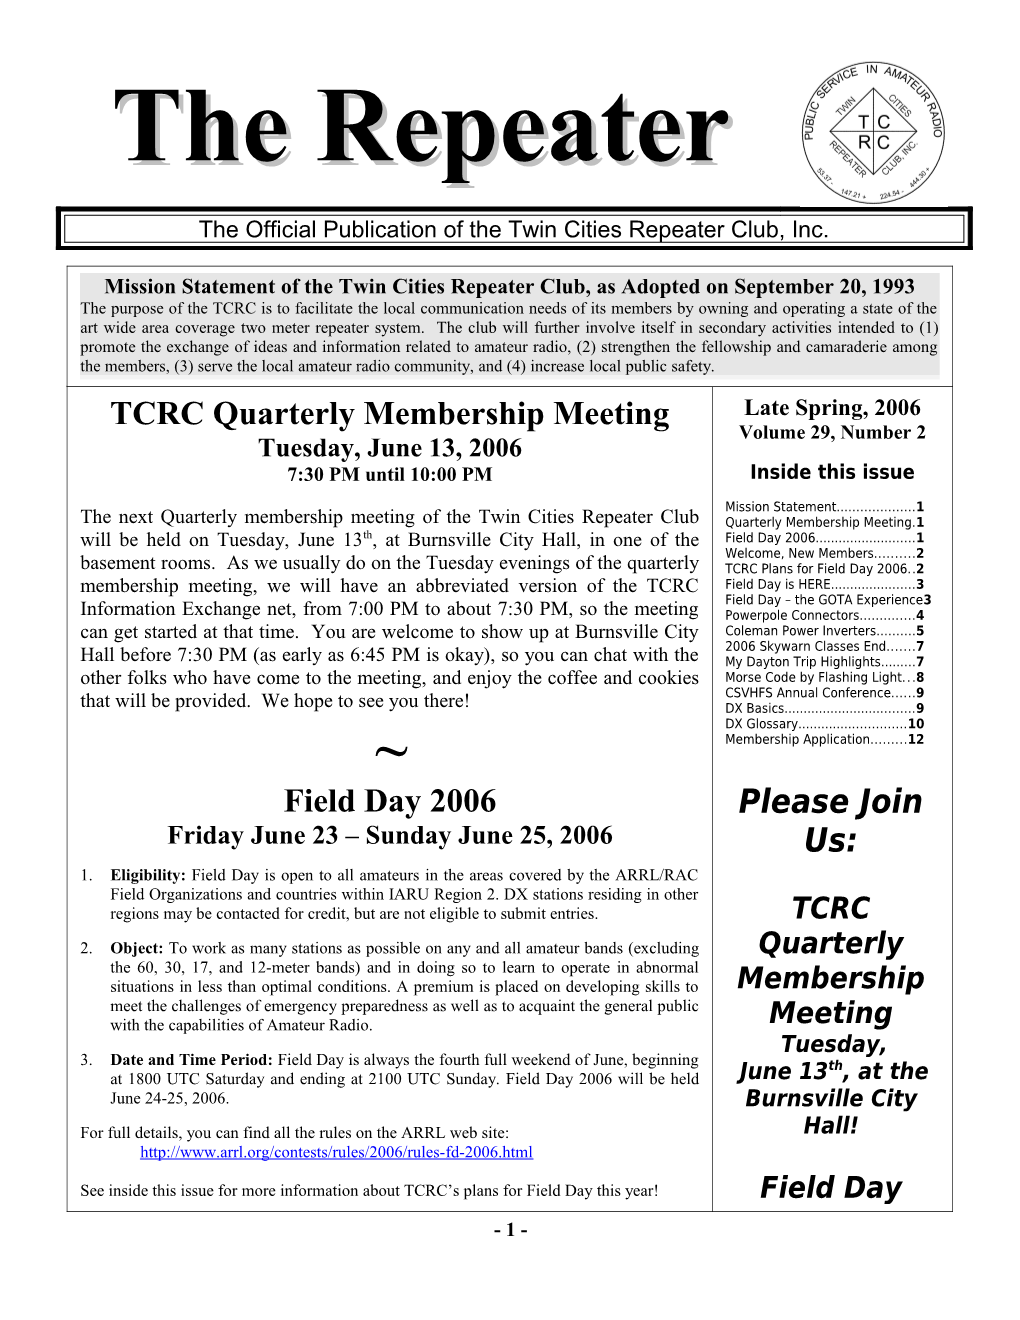 The Official Publication of the Twin Cities Repeater Club, Inc